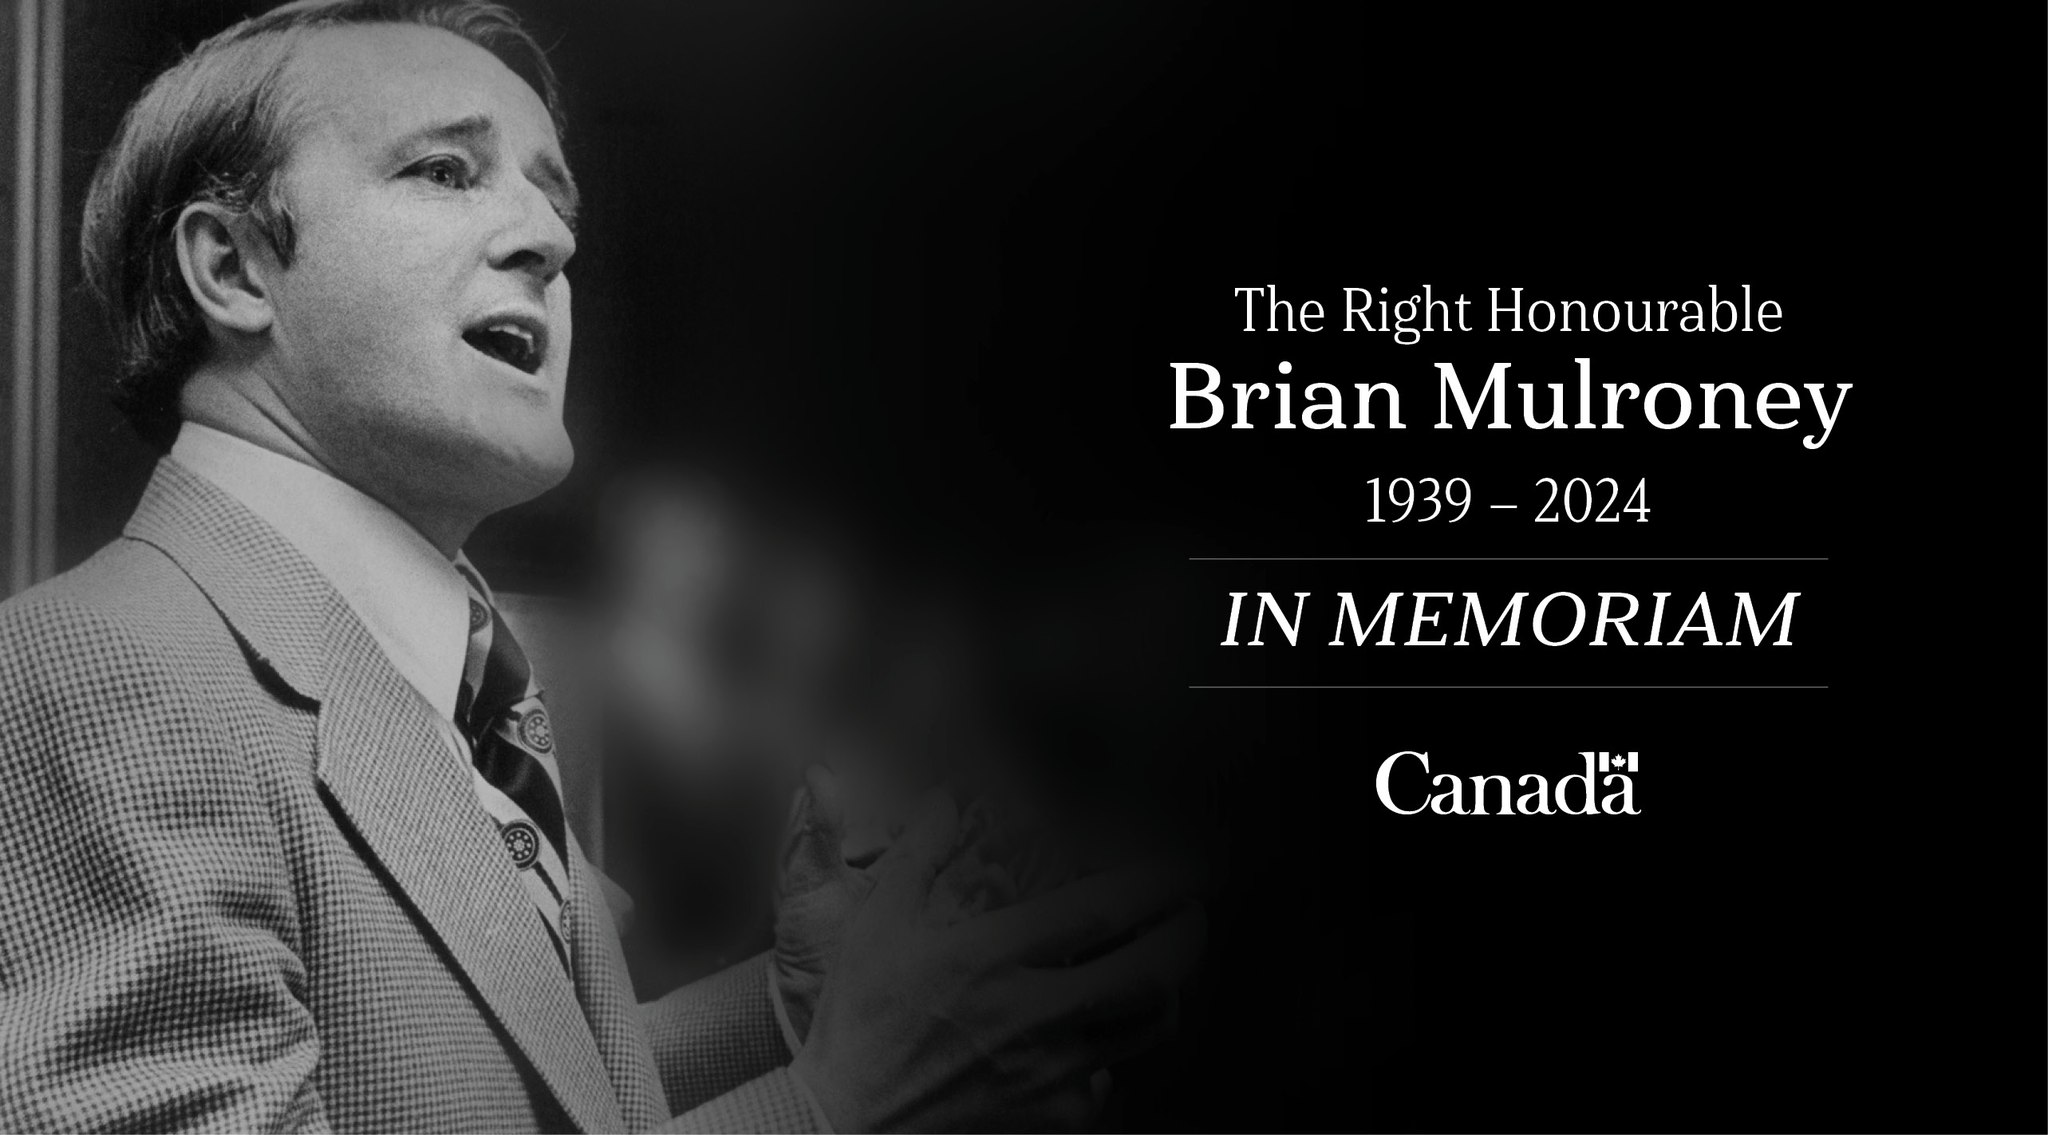 Graphic featuring black and white image of a man with grey hair and white text 'In Memoriam: The Right Honourable Brian Mulroney'